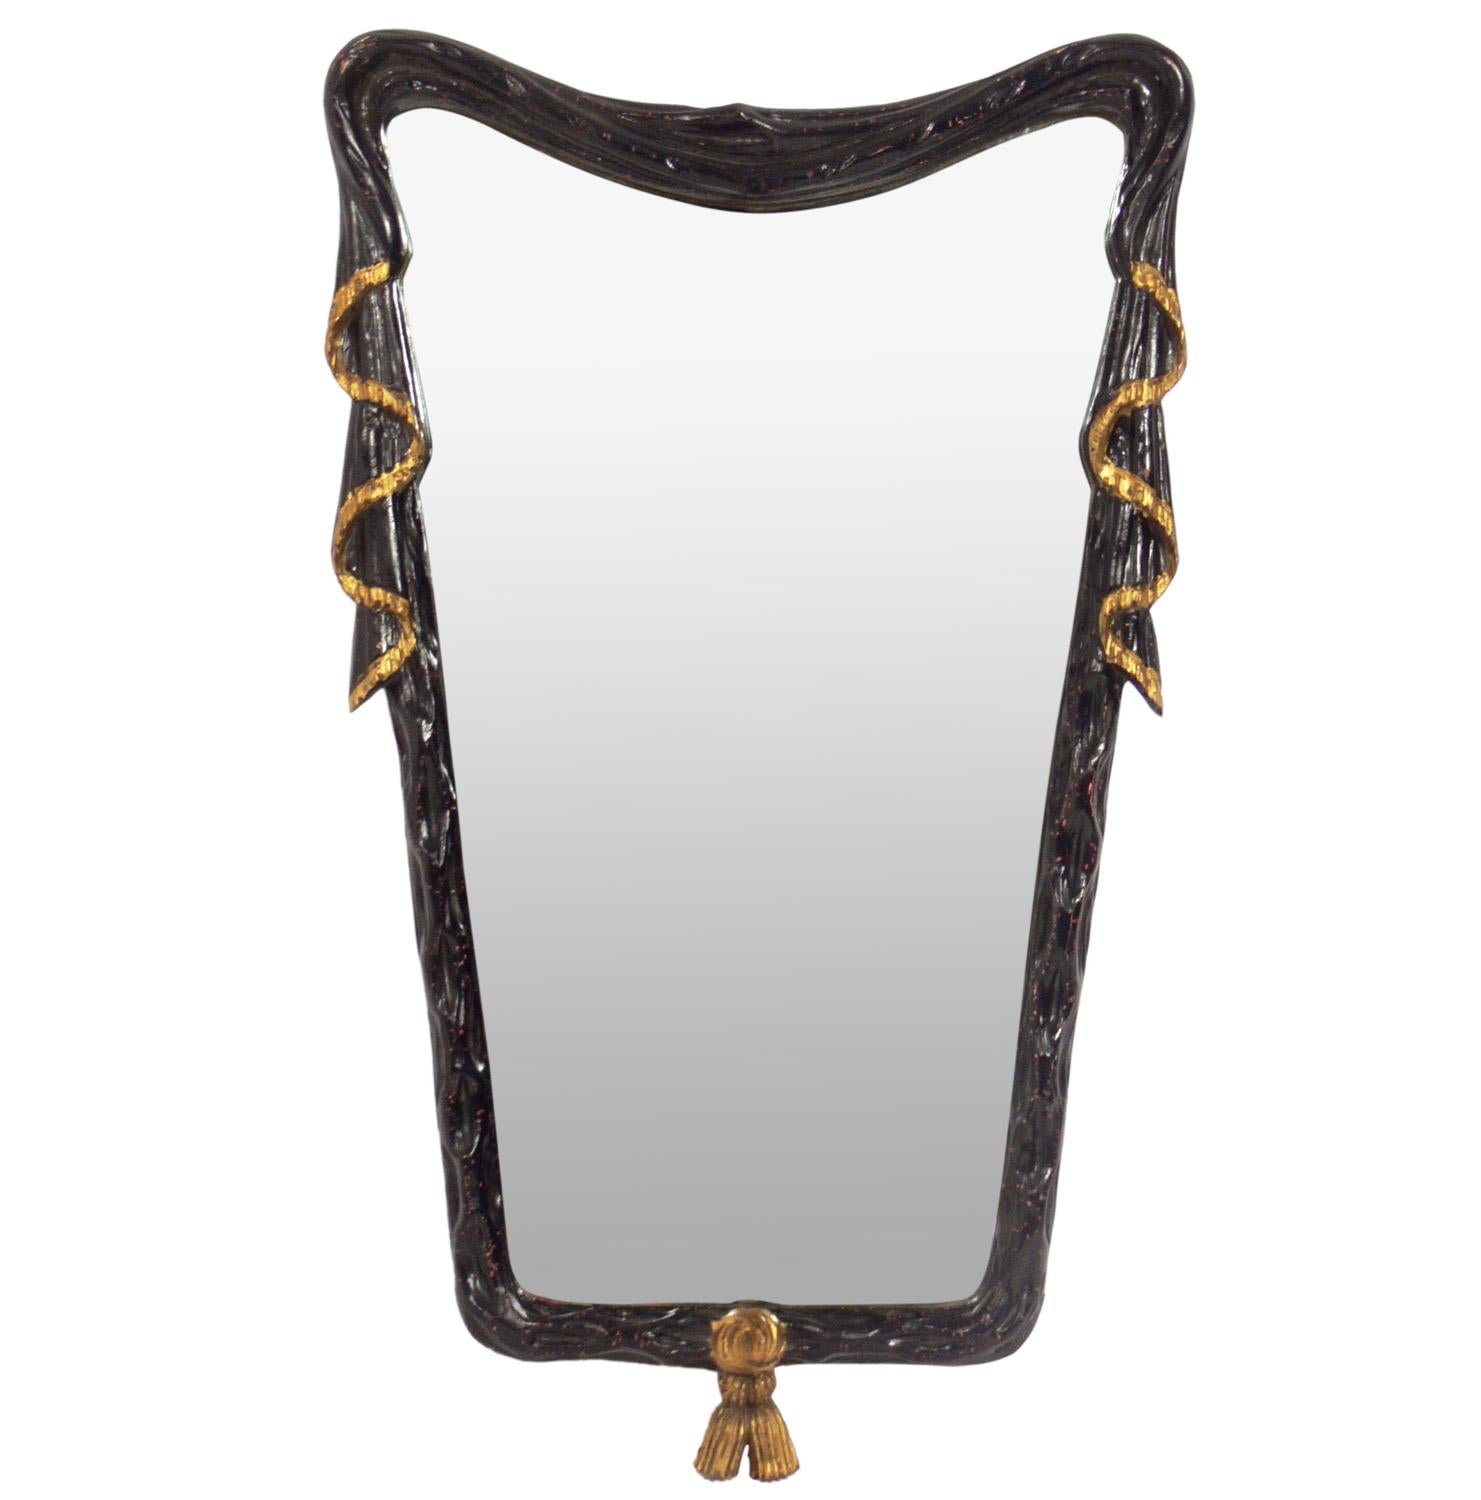 Italian mirror and wall-mounted console, Italy, circa 1950s. Retains it's original antiqued finish. The mirror measures 36